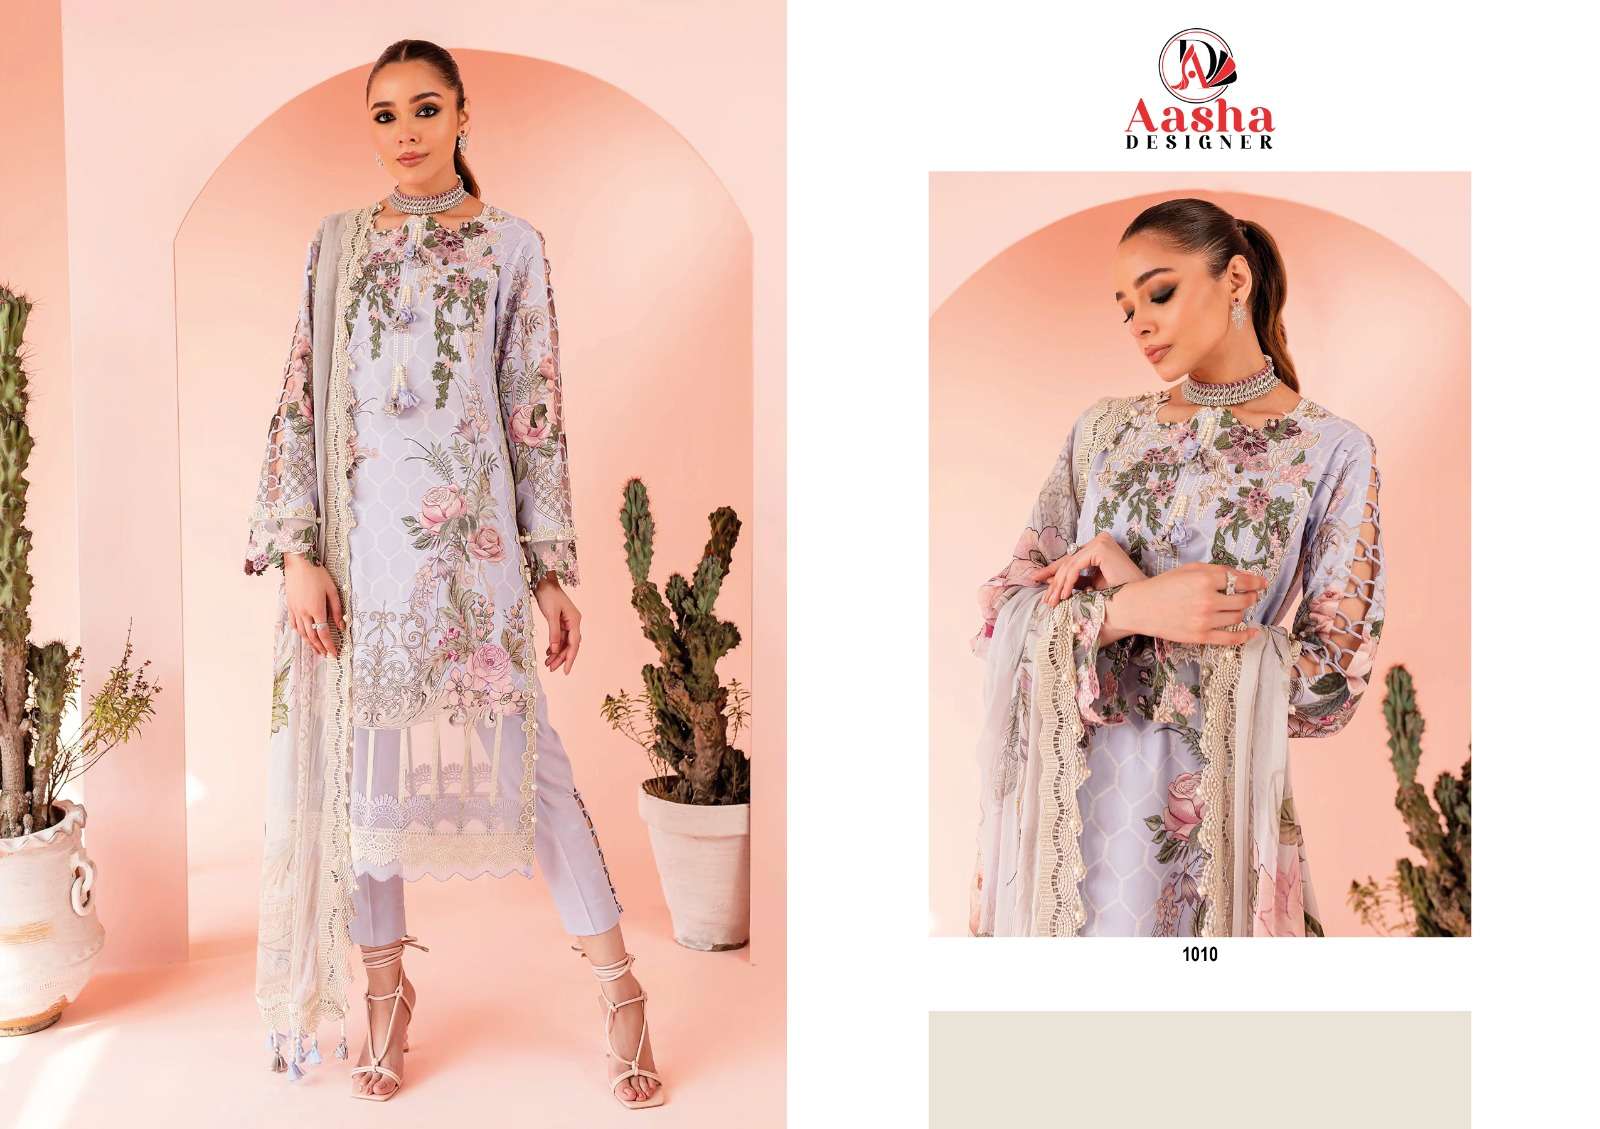 Queens Vol-2 By Aashna Designer 1008 To 1011 Series Designer Pakistani Suits Beautiful Fancy Stylish Colorful Party Wear & Occasional Wear Pure Cotton Print With Embroidery Dresses At Wholesale Price